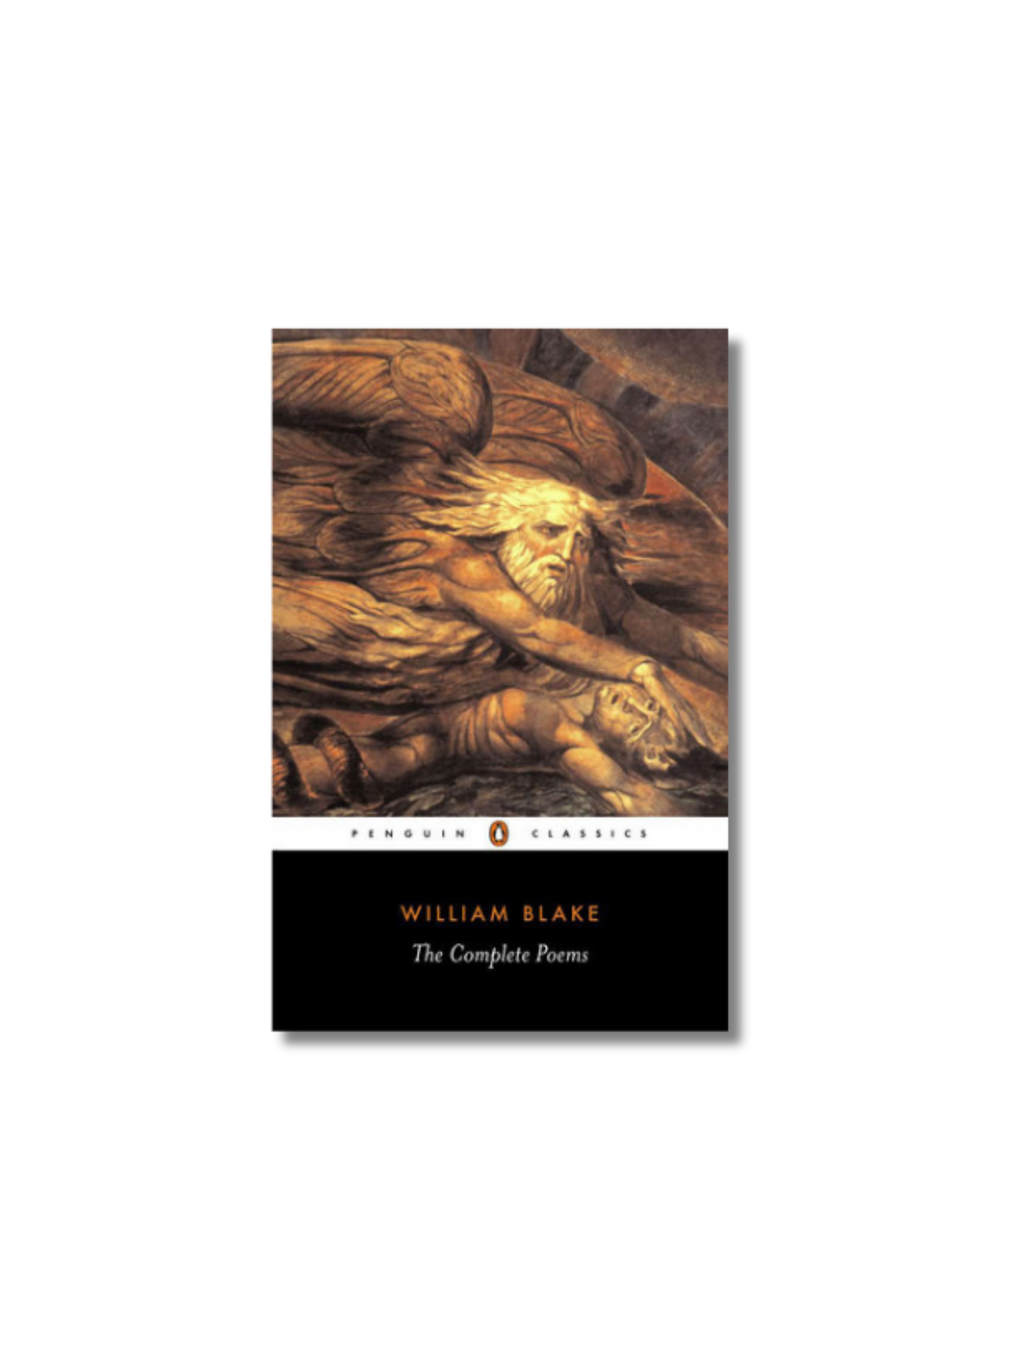 The Complete Poems: William Blake